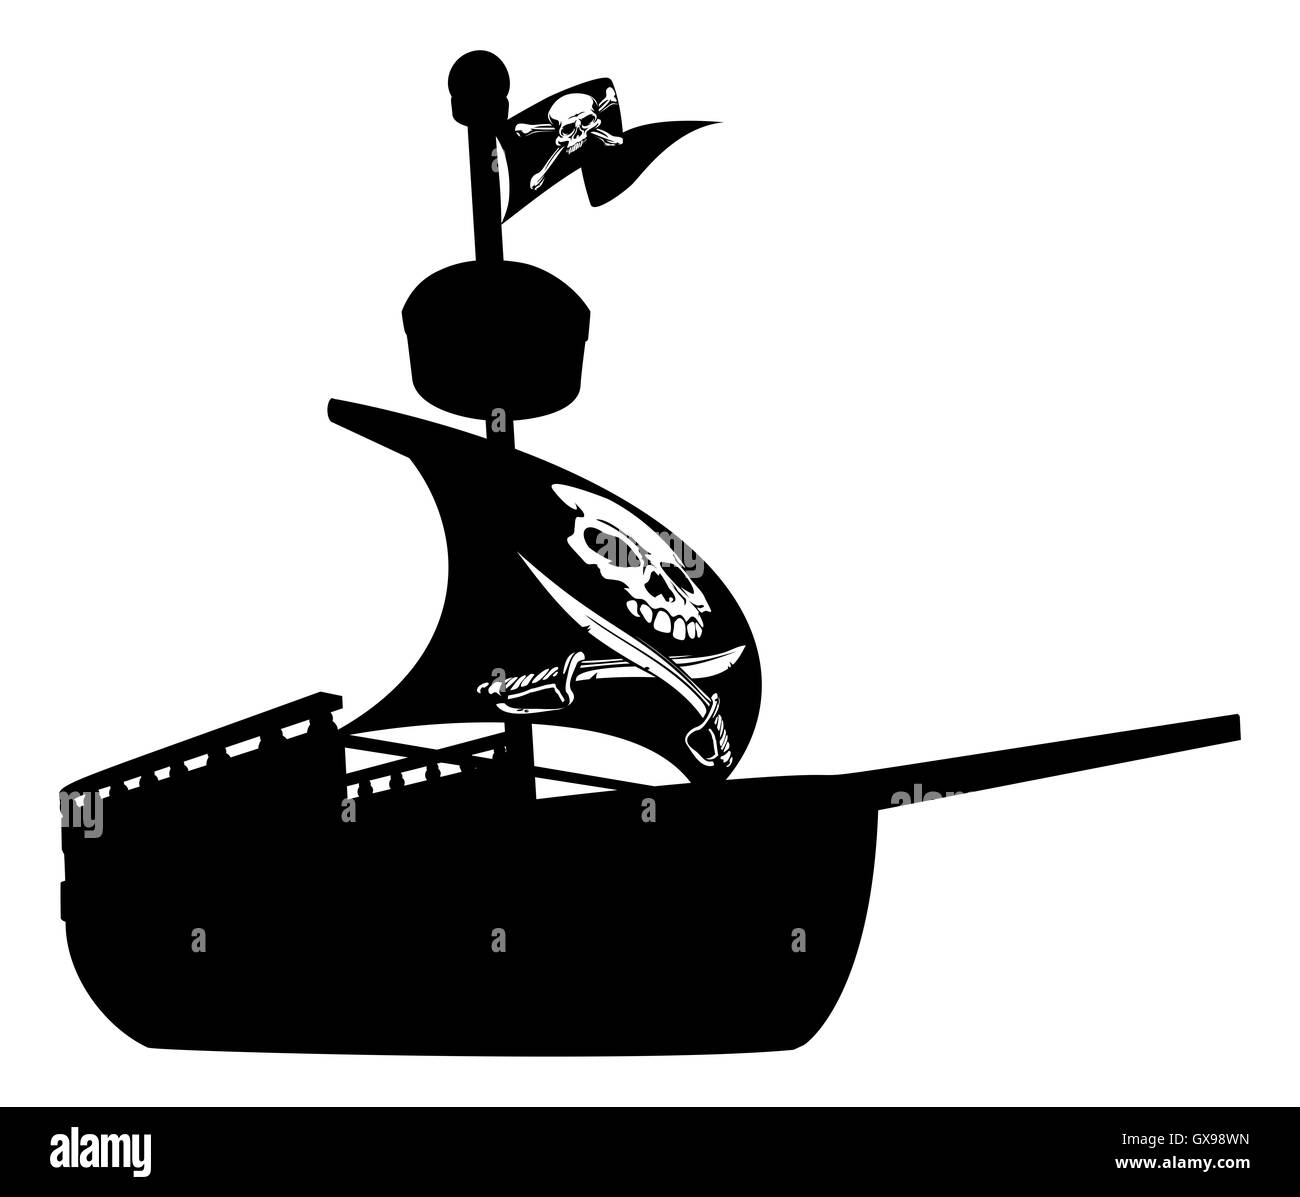 An illustration of a silhouette pirate ship boat flying a skull and crossed bones flag Stock Photo